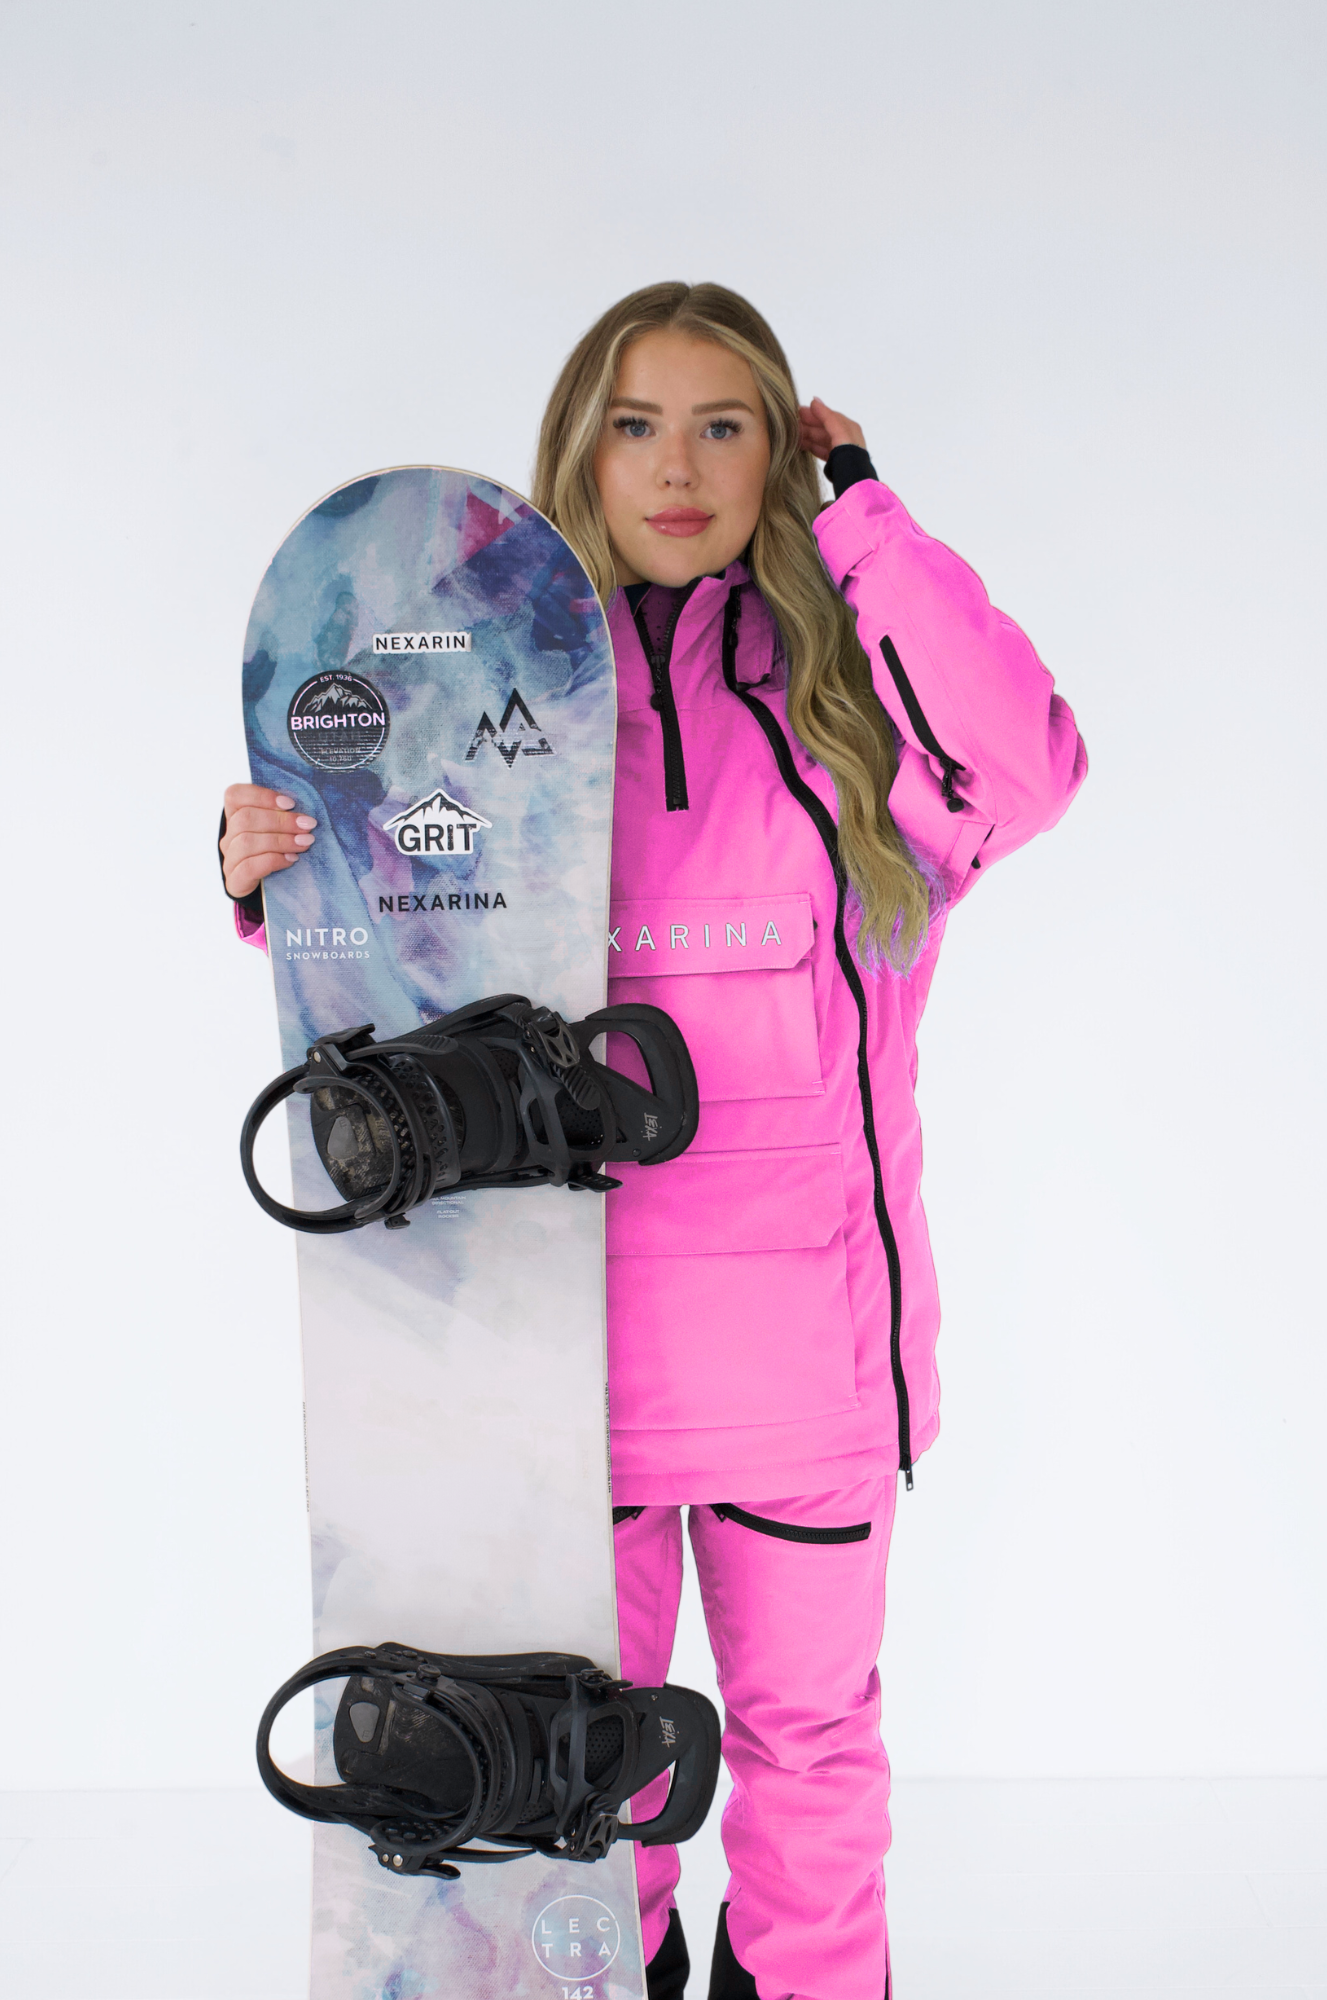 Woman in a pink Nexarina snowboard jacket holding a snowboard, posed against a white backdrop